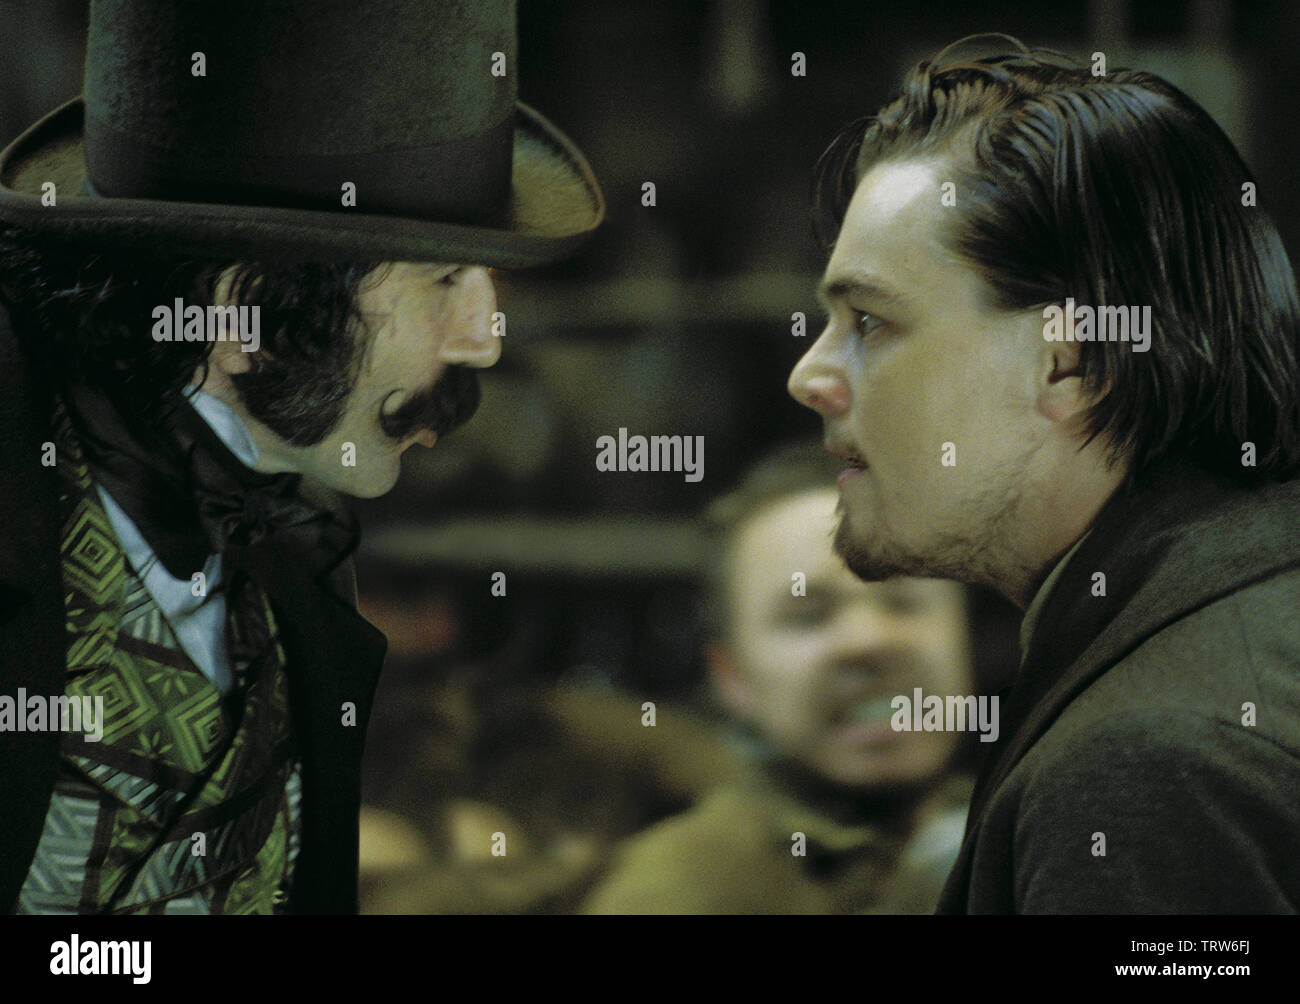 DANIEL DAY-LEWIS and LEONARDO DICAPRIO in GANGS OF NEW YORK (2002). Copyright: Editorial use only. No merchandising or book covers. This is a publicly distributed handout. Access rights only, no license of copyright provided. Only to be reproduced in conjunction with promotion of this film. Credit: MIRAMAX / Album Stock Photo